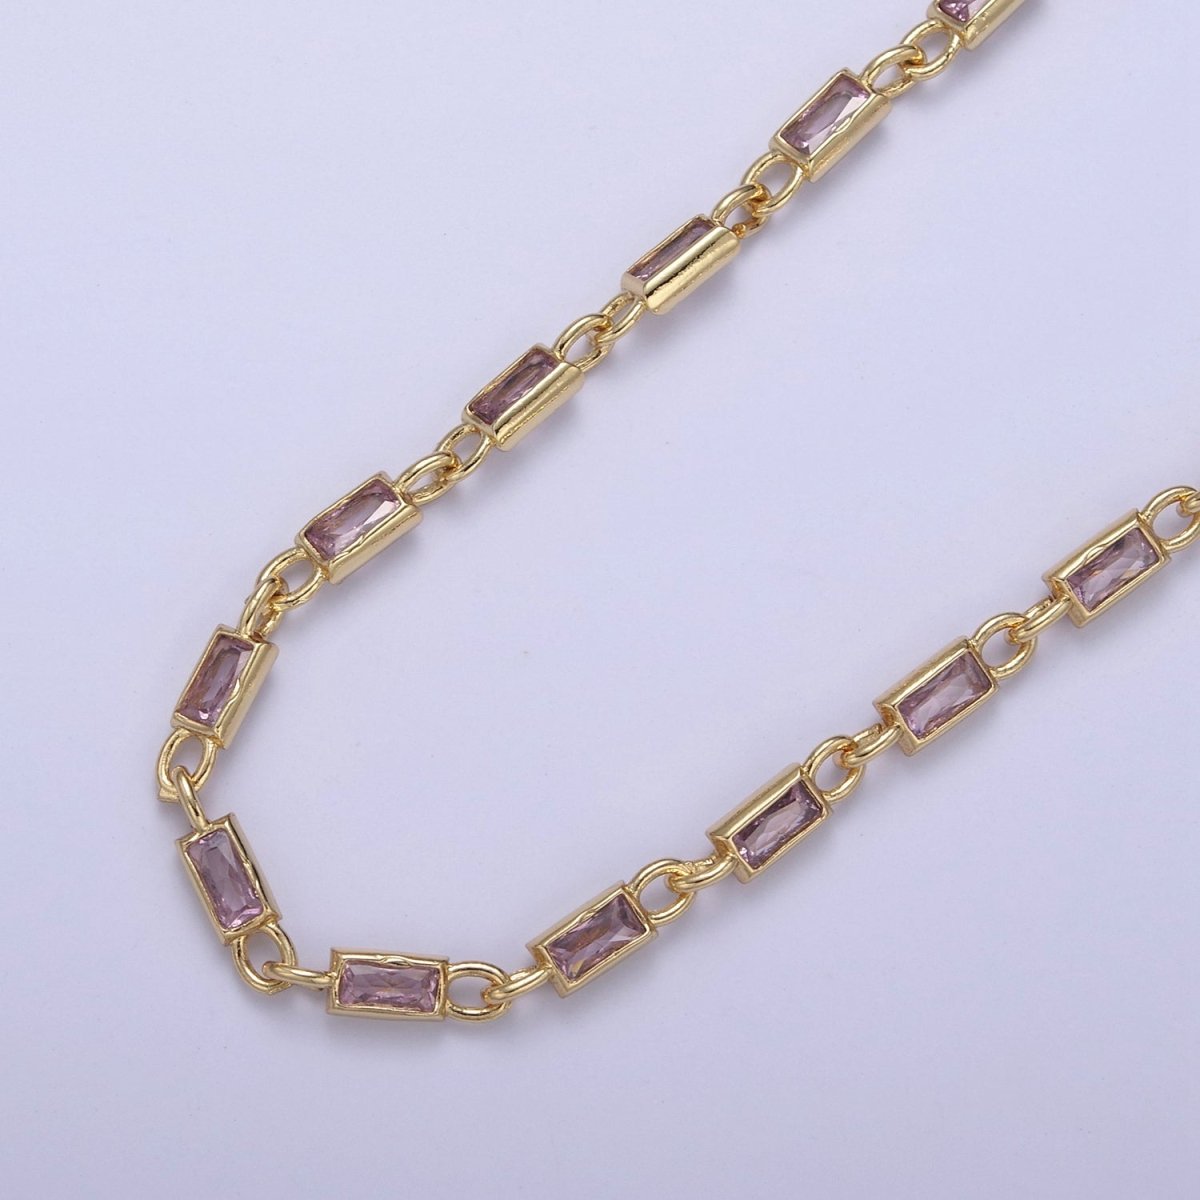 24K Gold Filled 3.6mm Baguette Cubic Zirconia Station Necklace Bulk Unfinished Chain | ROLL-757, ROLL-778, ROLL-779, ROLL-860, ROLL-861 Clearance Pricing - DLUXCA